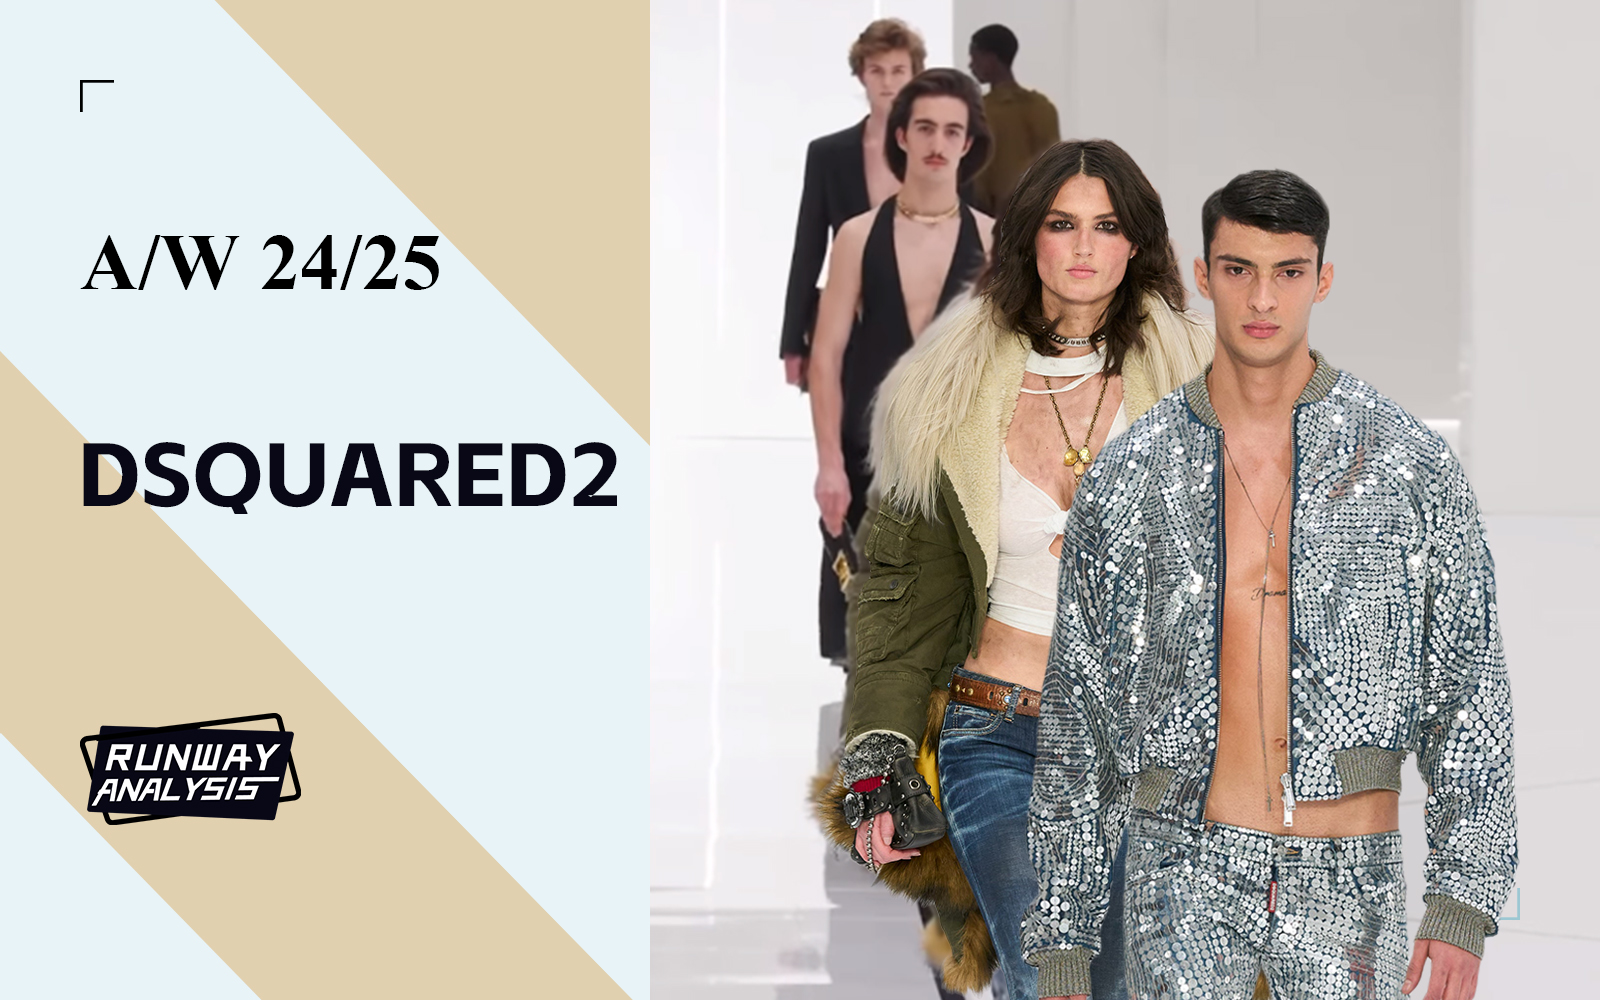 Dual Expression -- The Runway Analysis of Dsquared2